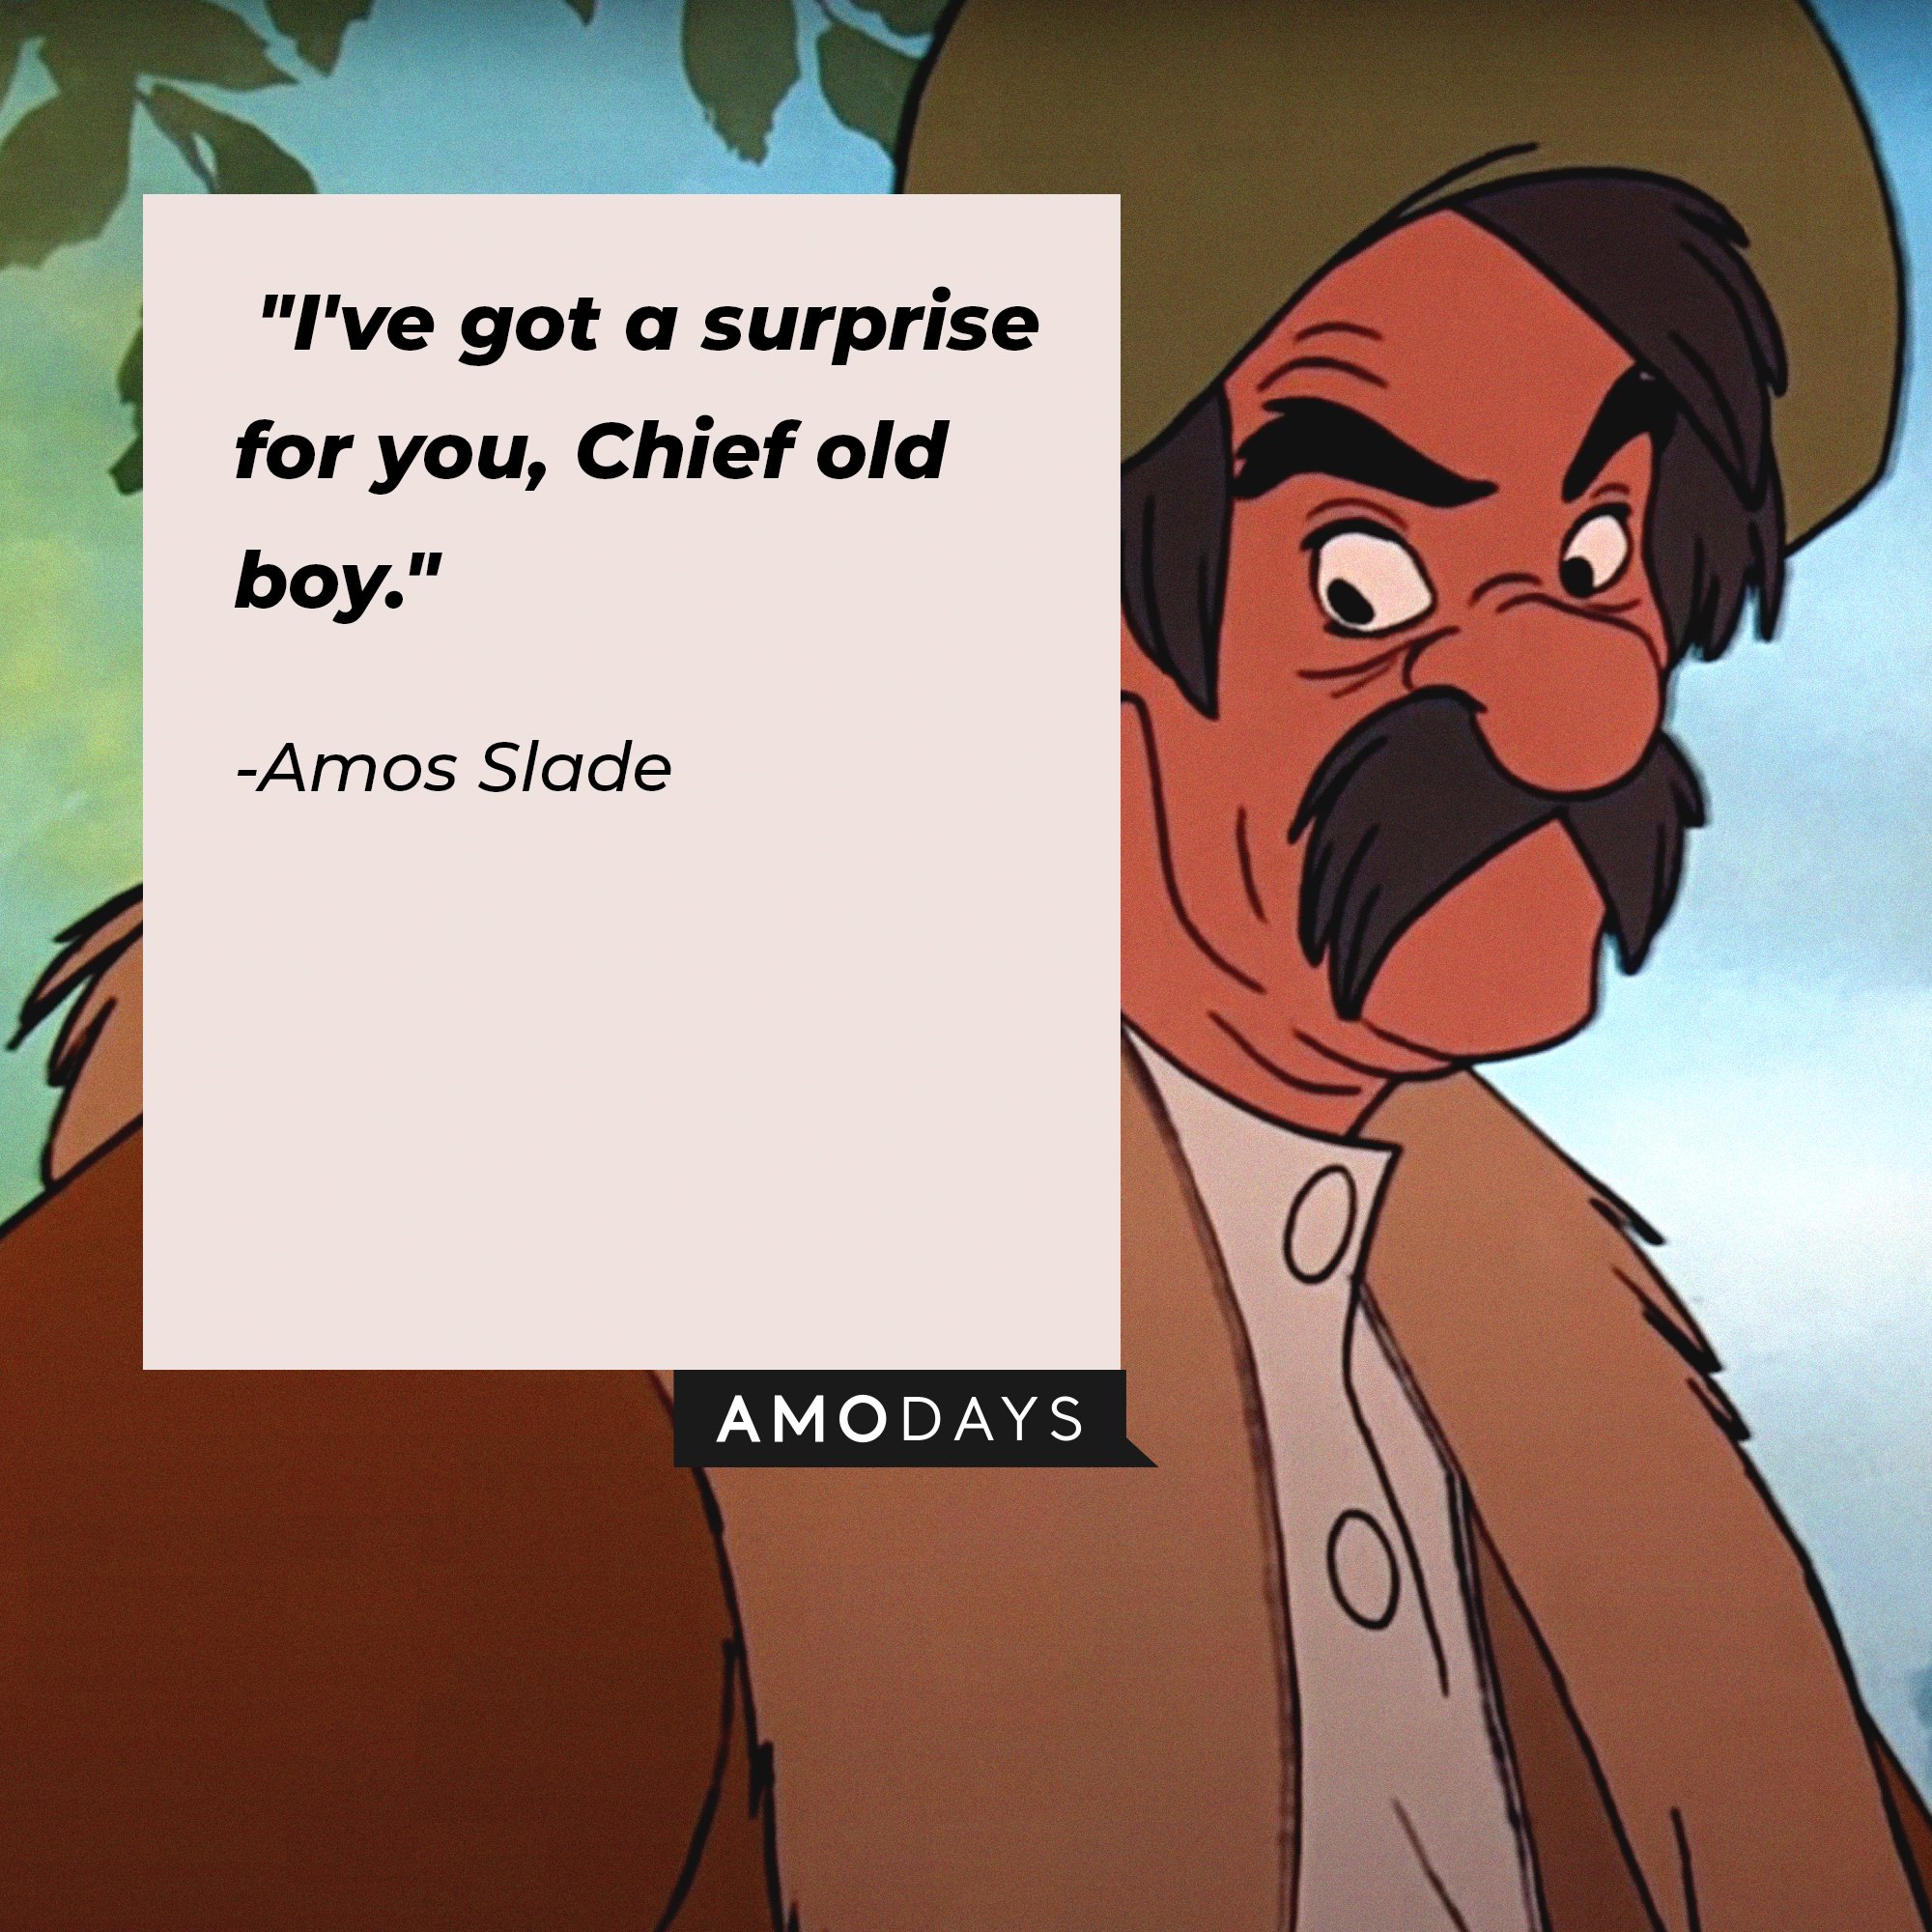 Amos Slade’s quote: "I've got a surprise for you, Chief old boy." | Image: AmoDays